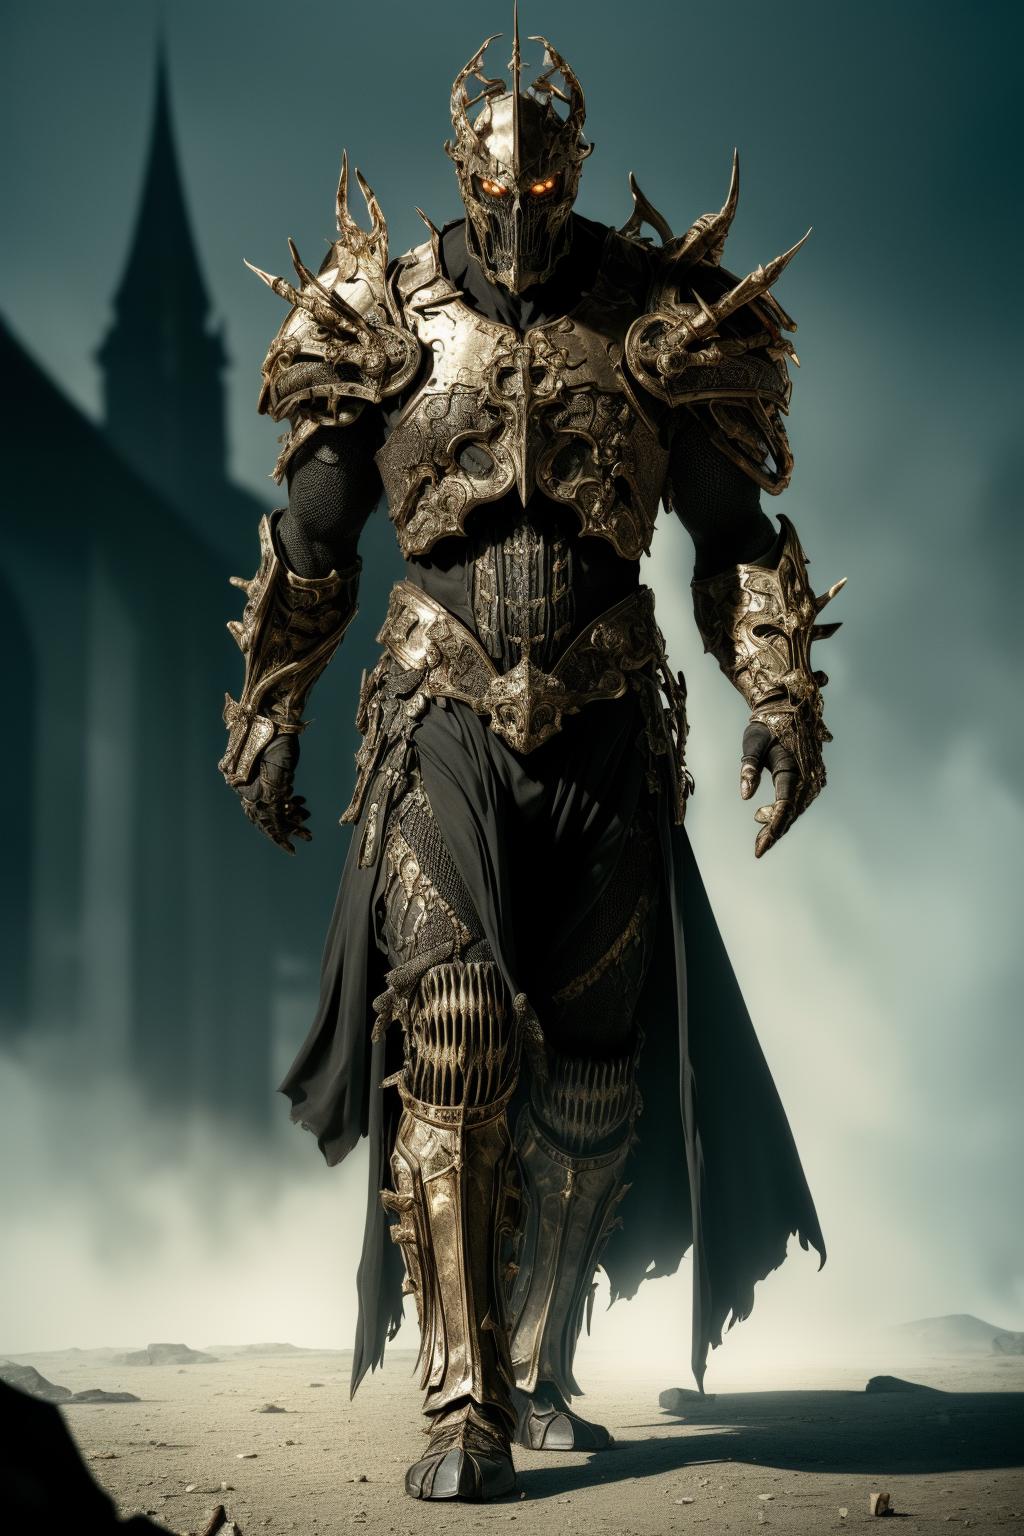 A Warrior in Armor, Wielding a Sword and Shield, Stands in a Darkened Environment.